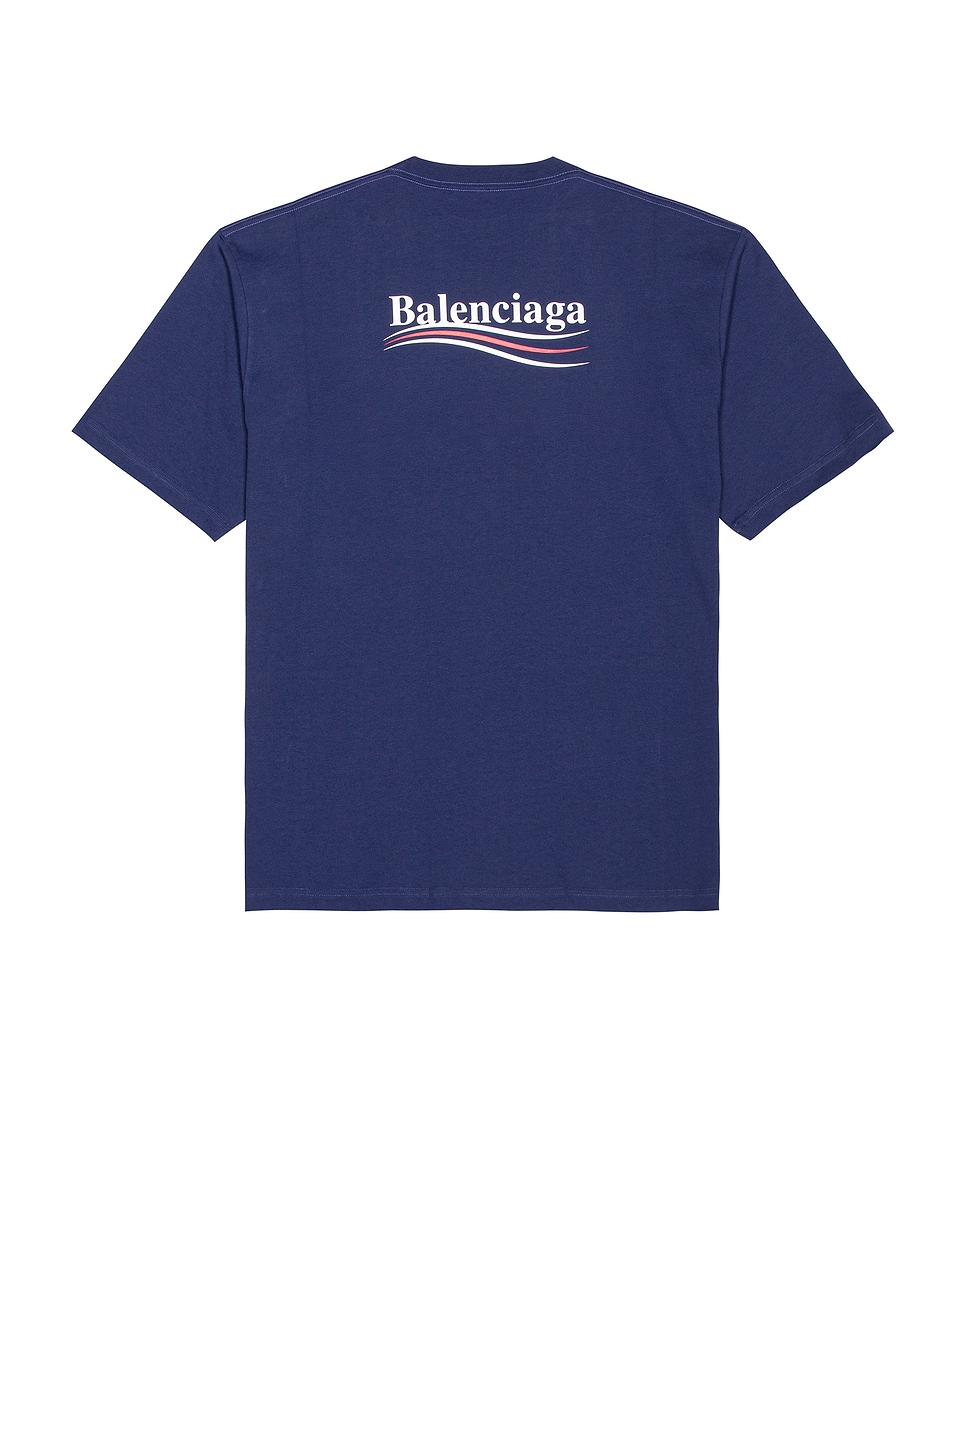 Image 1 of Balenciaga Short Sleeve Large Fit Tee in Pacific Blue & White